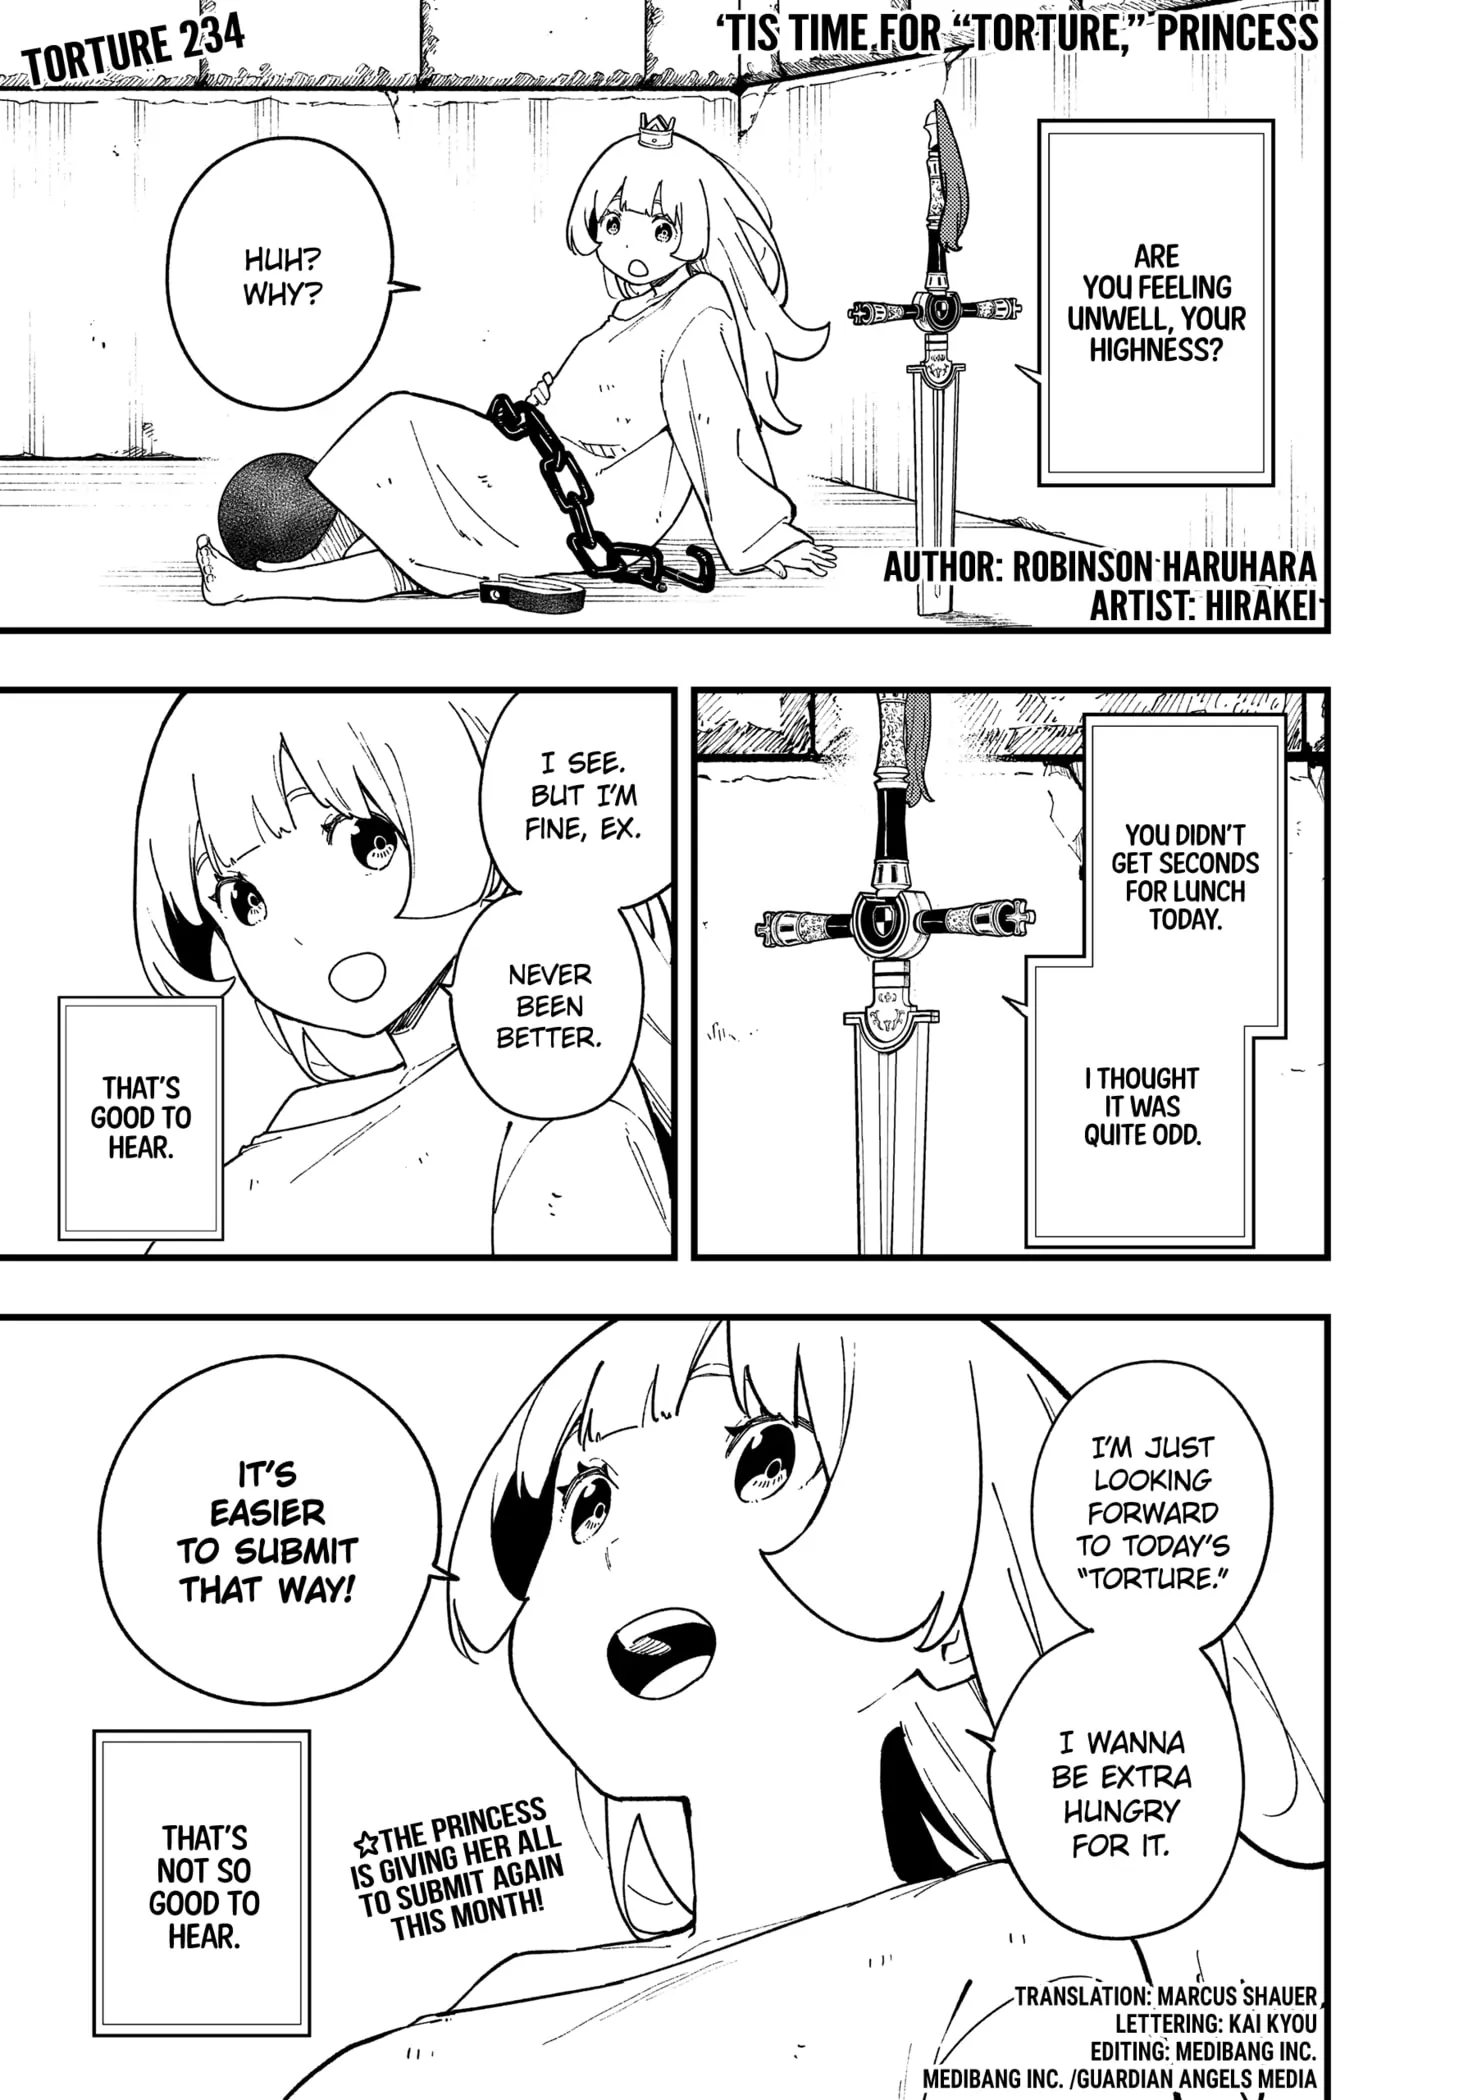 It's Time for "Interrogation", Princess! - chapter 234 - #1